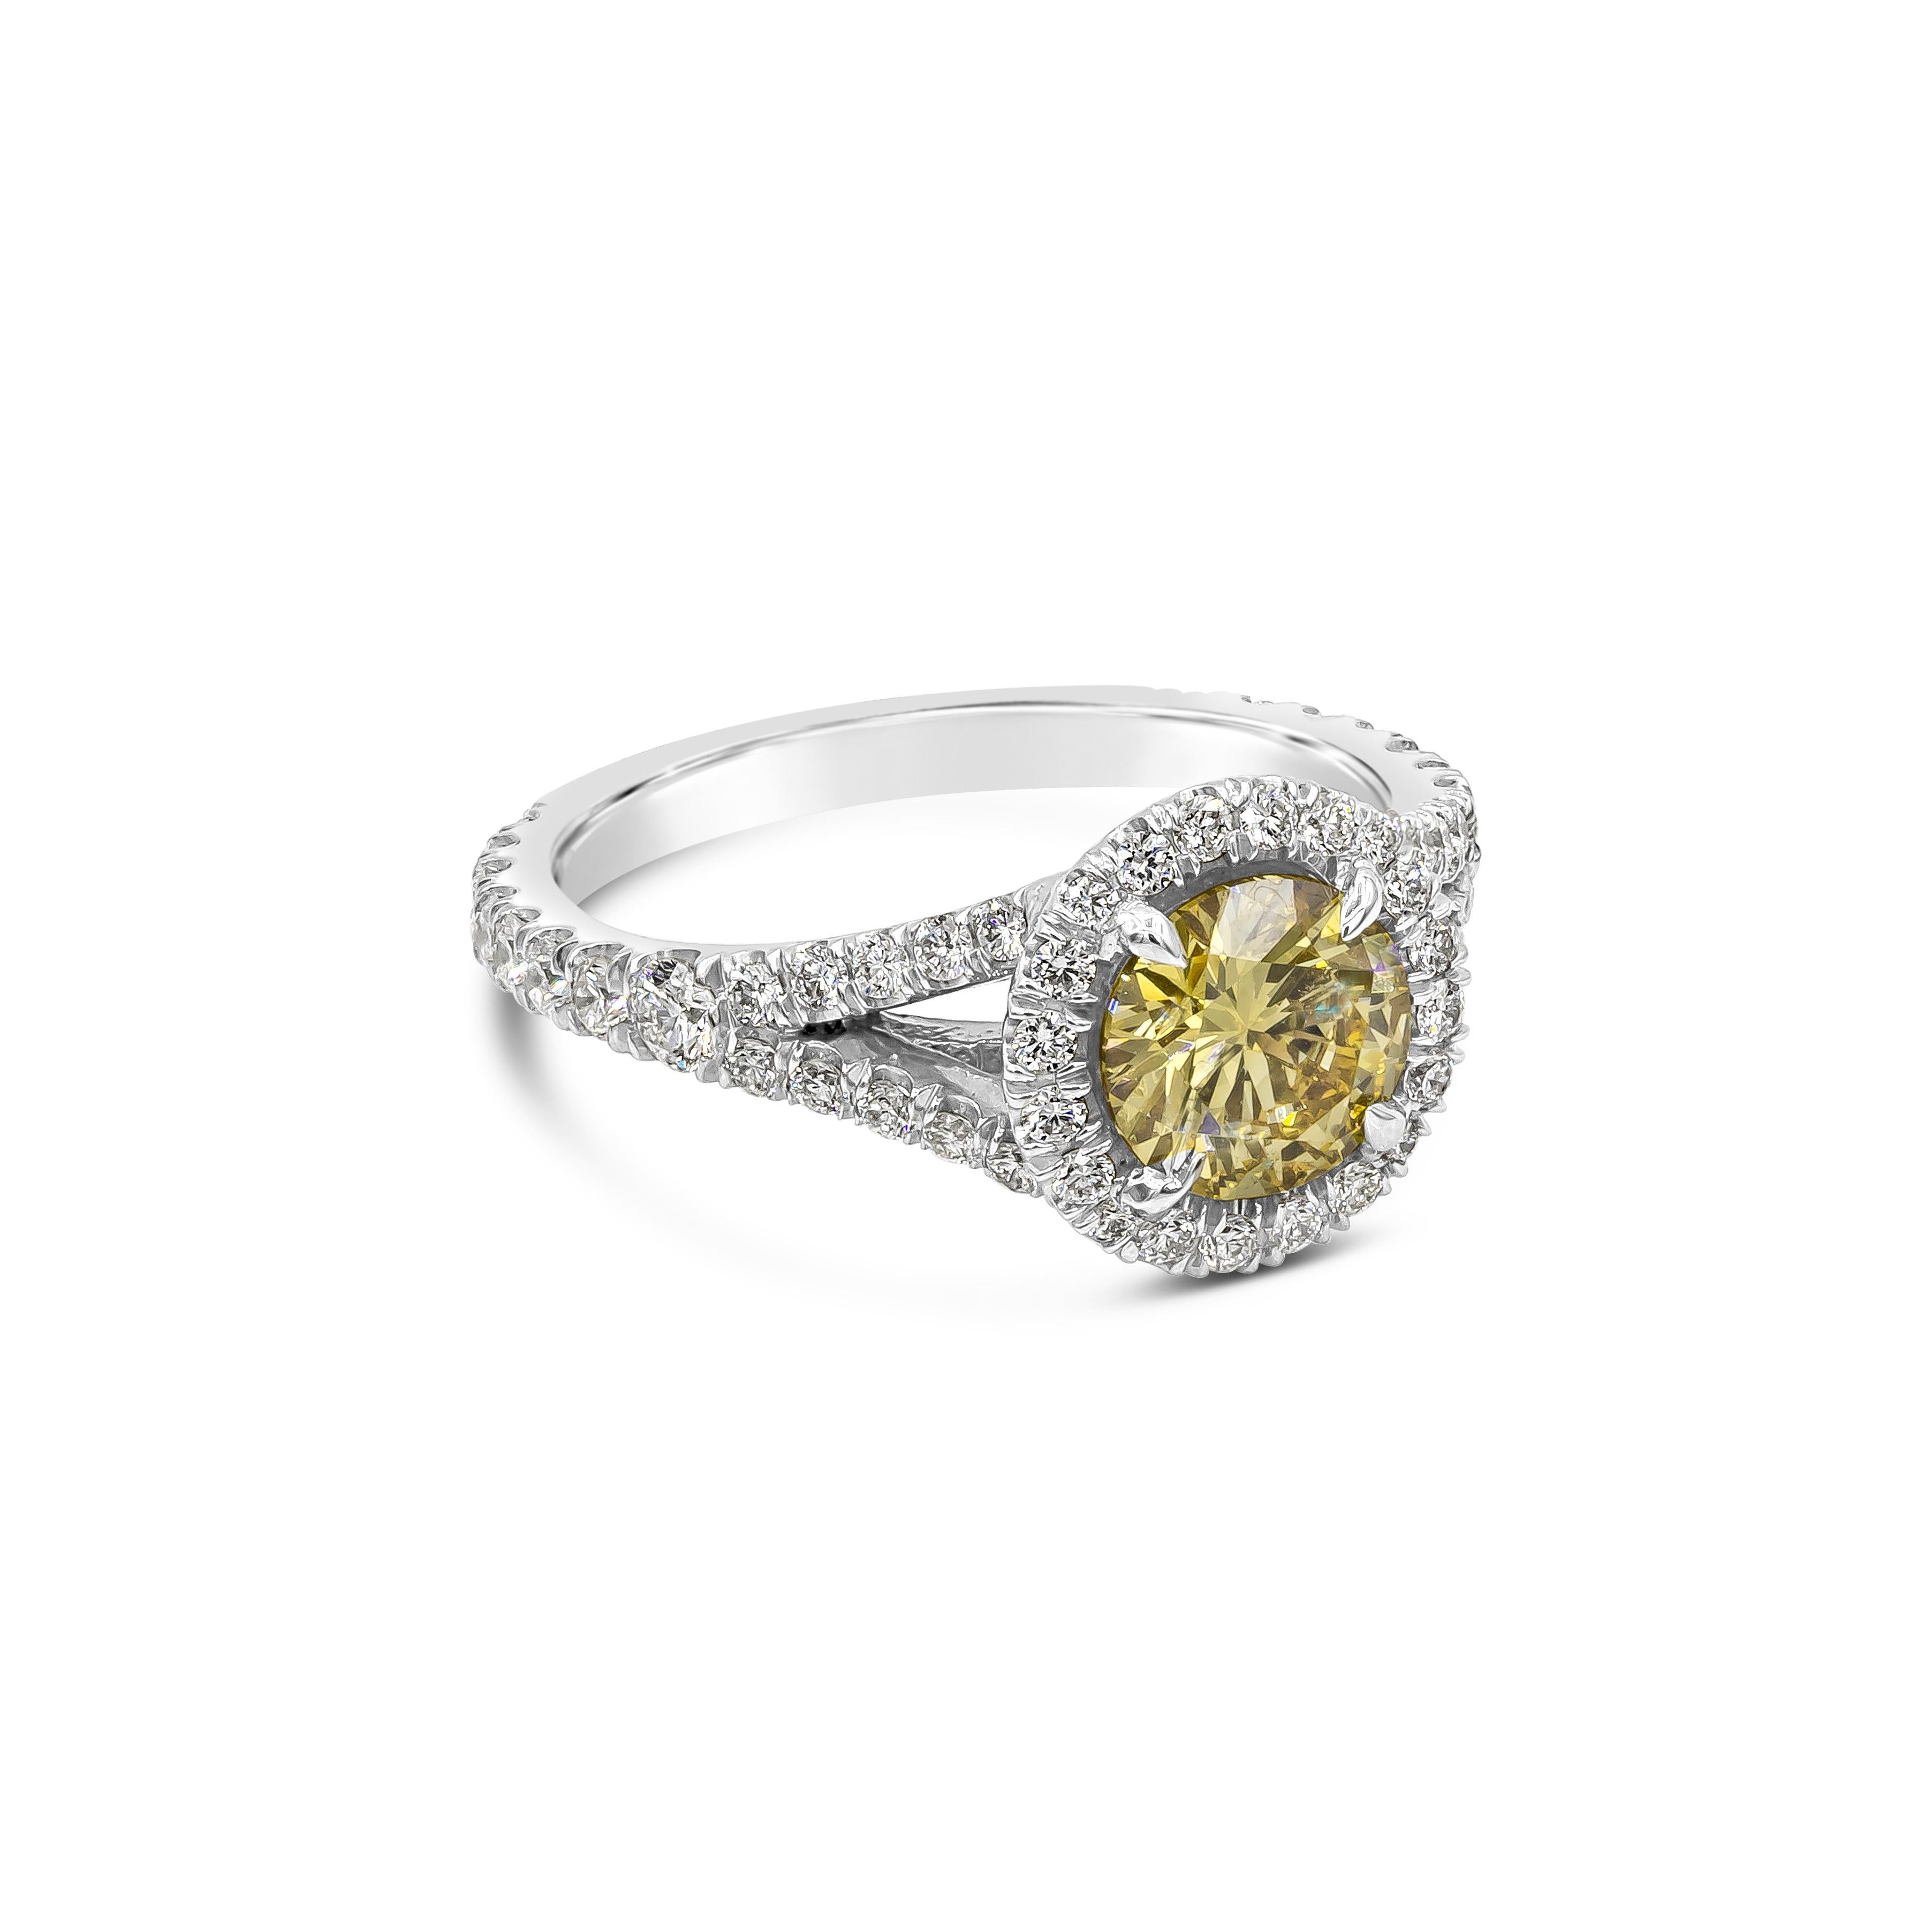 An appealing engagement ring showcasing a GIA Certified round cut diamond, Fancy Intense Yellow in Color and SI1 in Clarity. Surrounded and Accented by brilliant round diamonds in a chic split shank setting, Diamonds weighs 1.02 carats total. Made